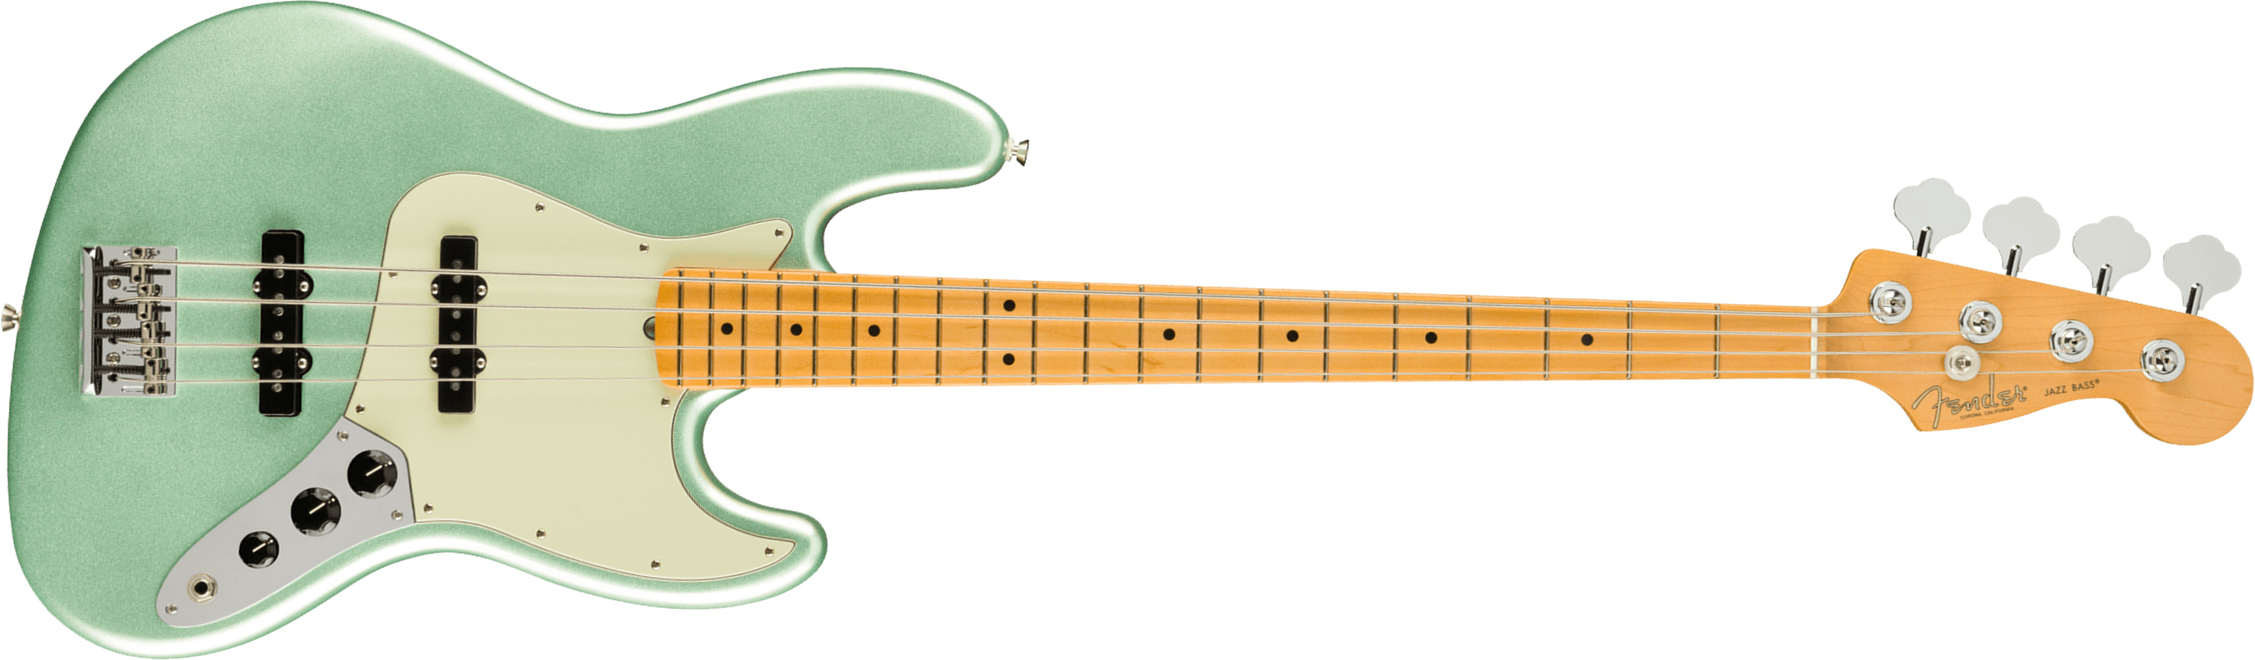 Fender Jazz Bass American Professional Ii Usa Mn - Mystic Surf Green - Basse Électrique Solid Body - Main picture